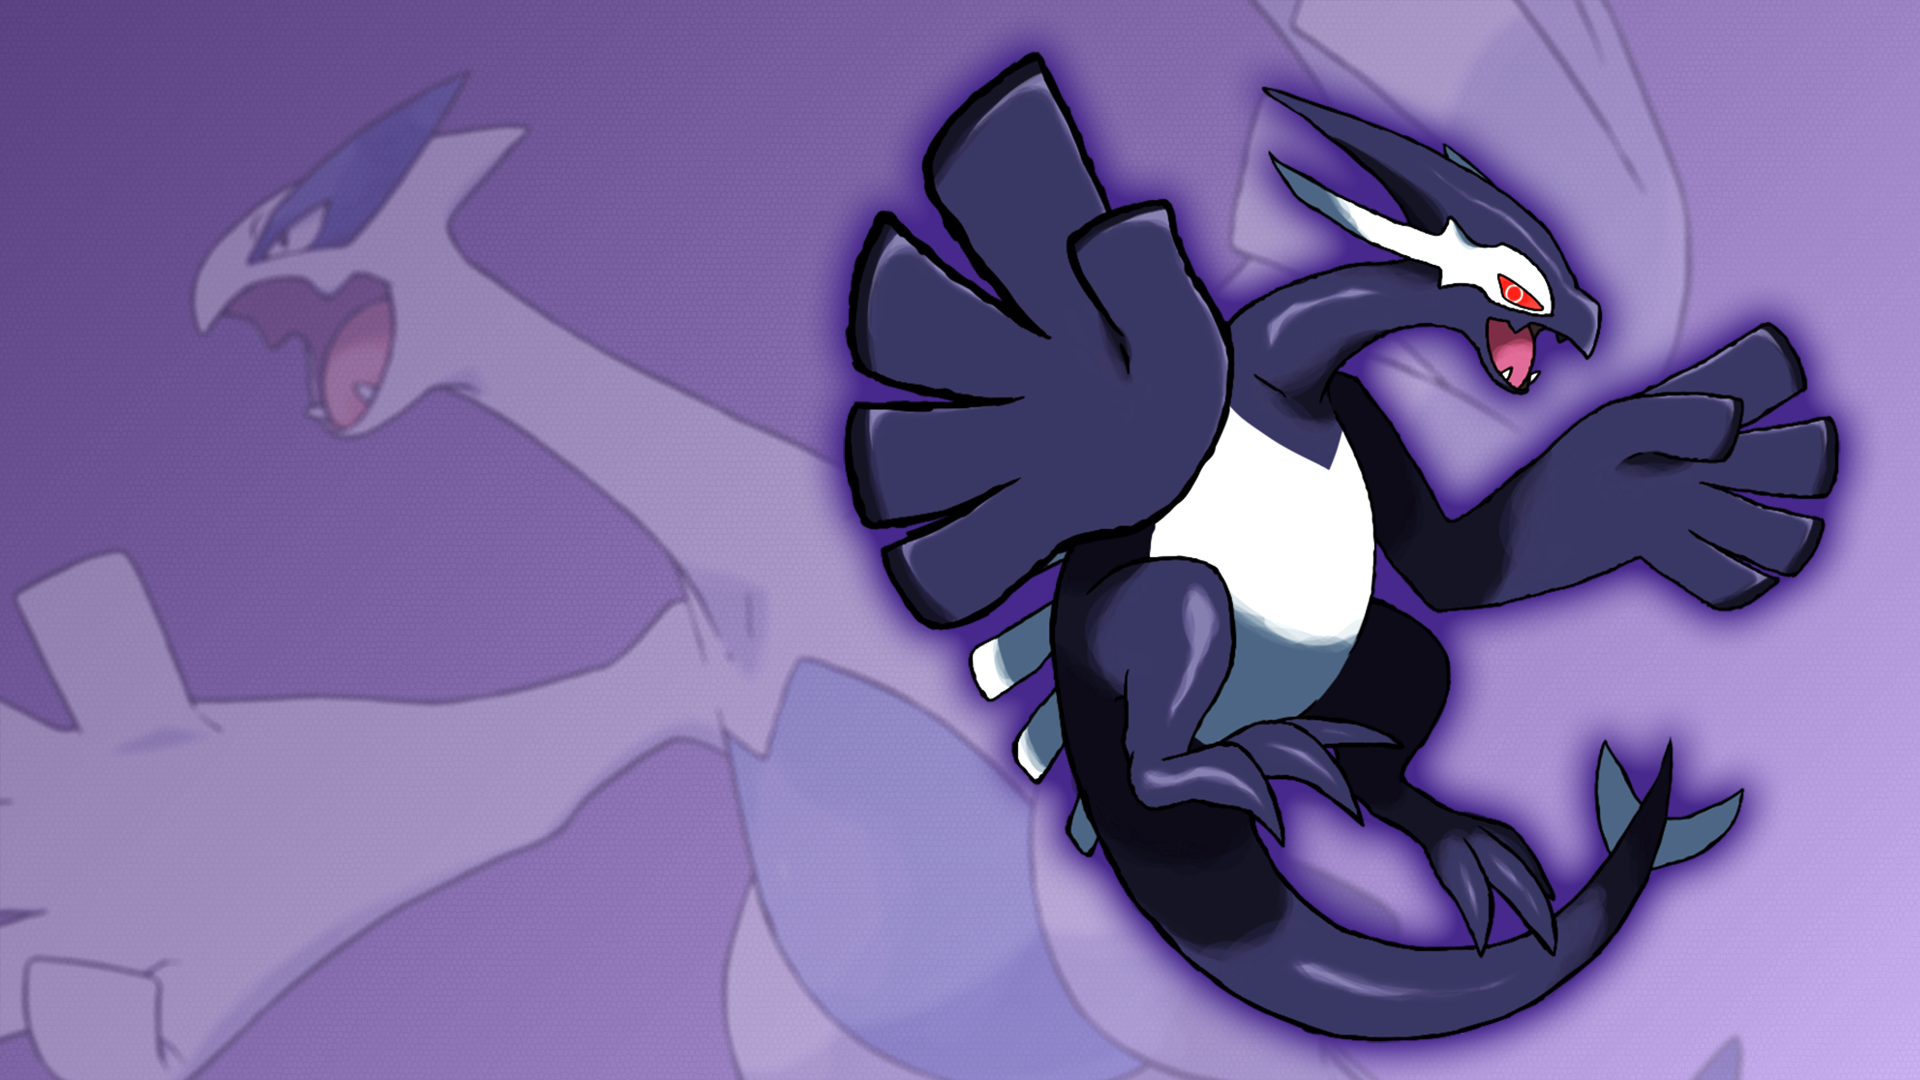 Lugia and Shadow Lugia Wallpaper by Glench on